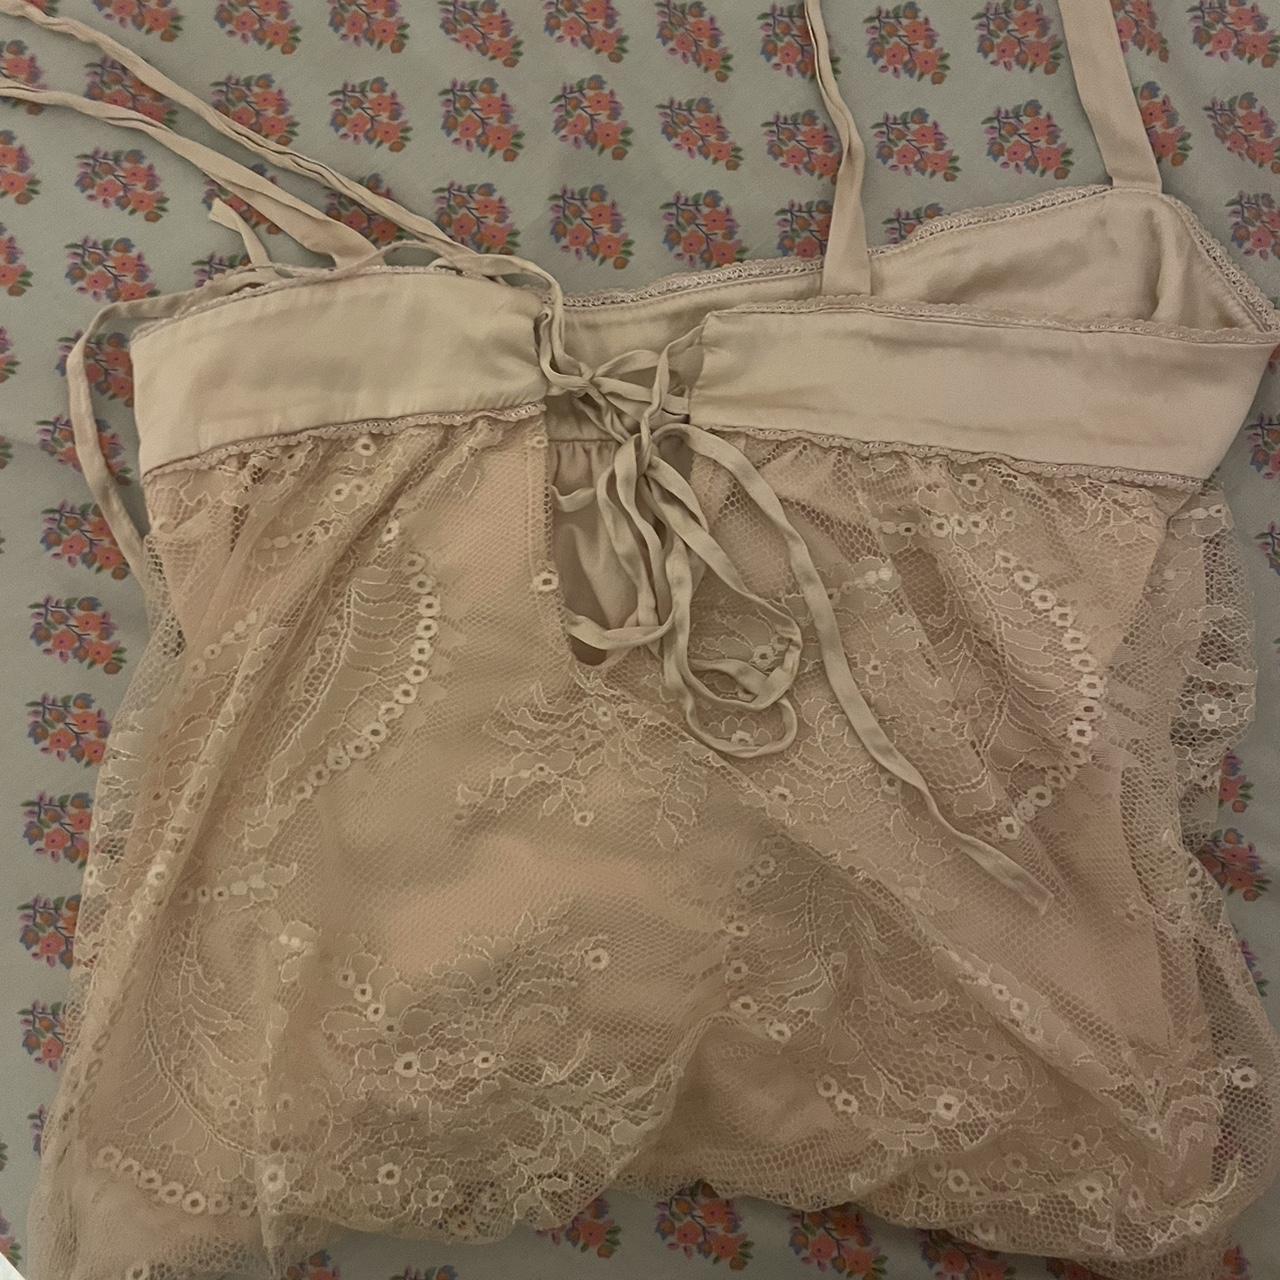 Bebe lace + silk top size xs but fits more like a... - Depop